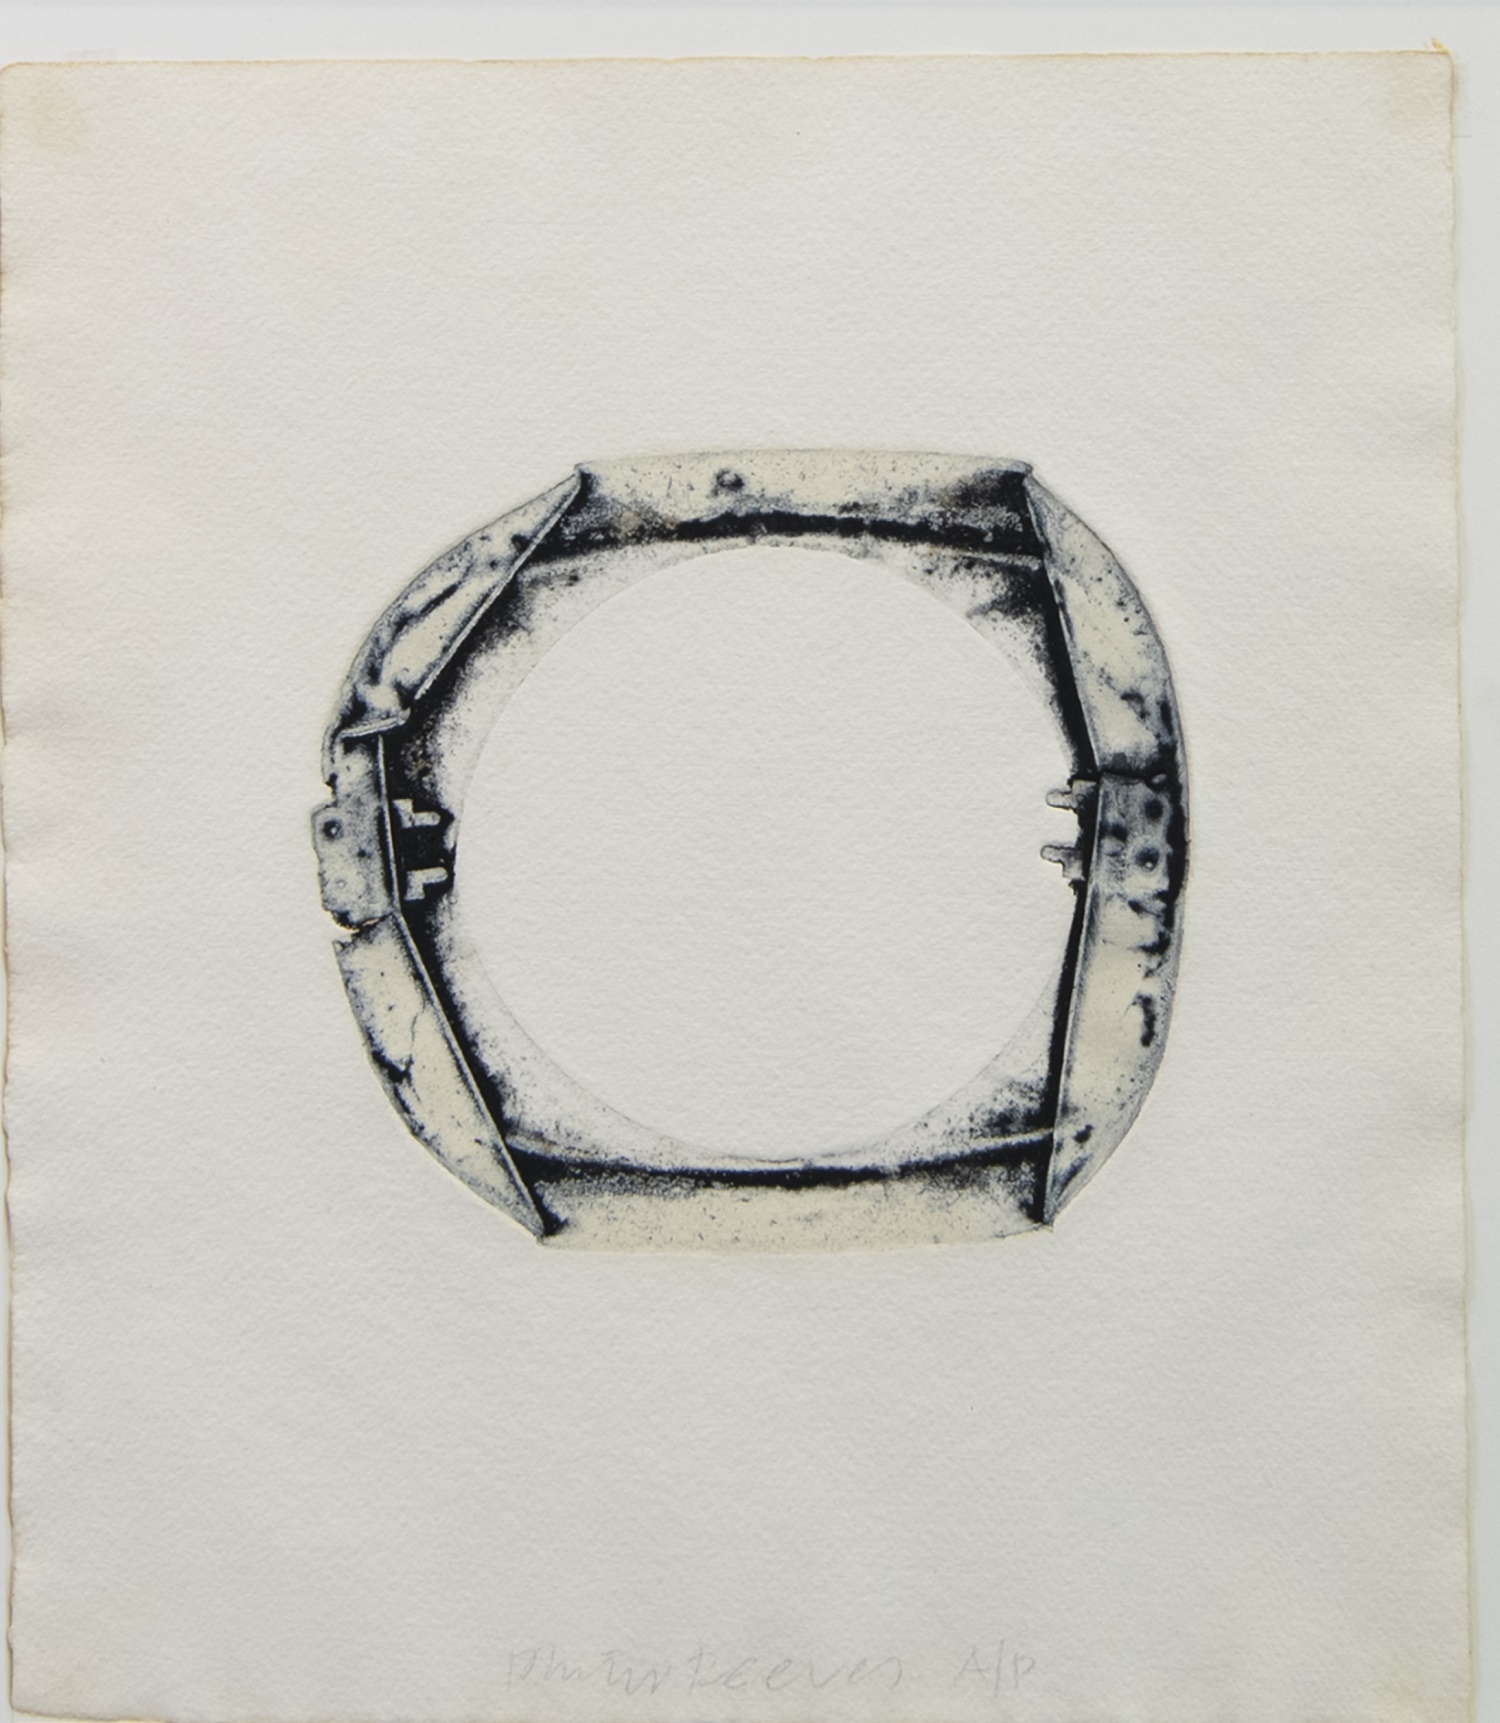 FRAGMENT, A PRINT BY PHILIP REEVES - Image 2 of 2